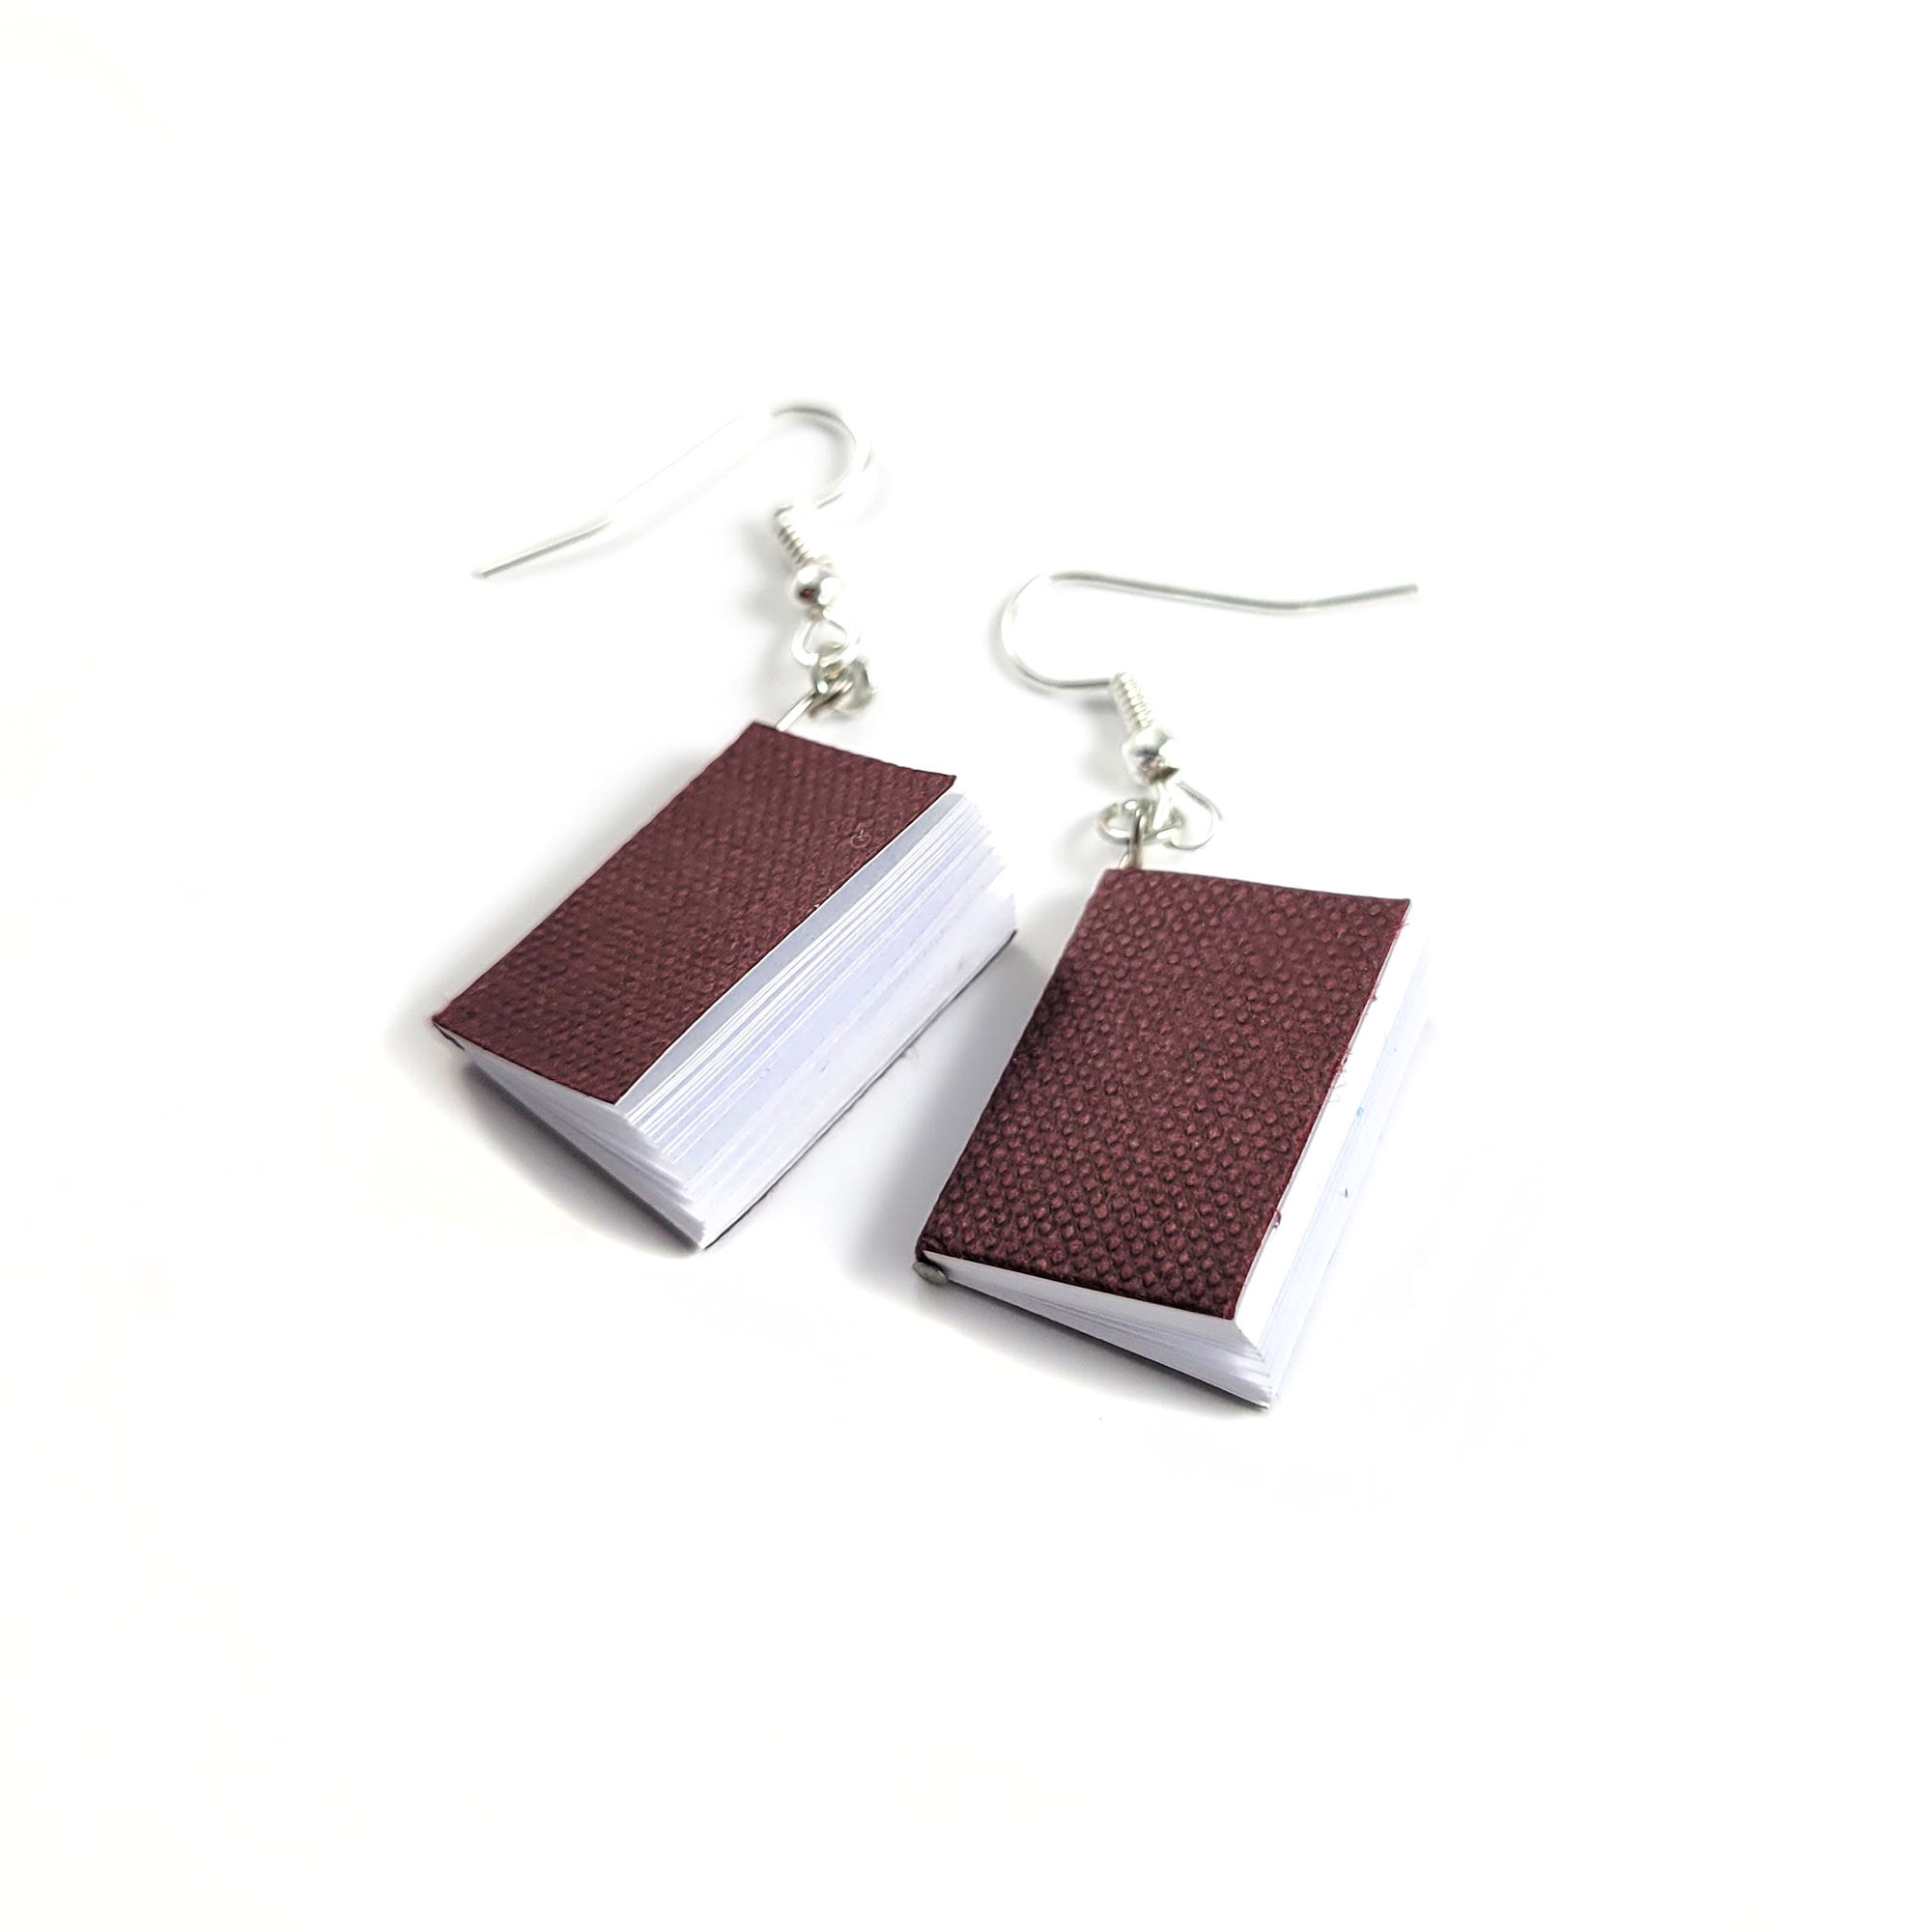 Write Your Own Story Book Earrings by Wilde Designs